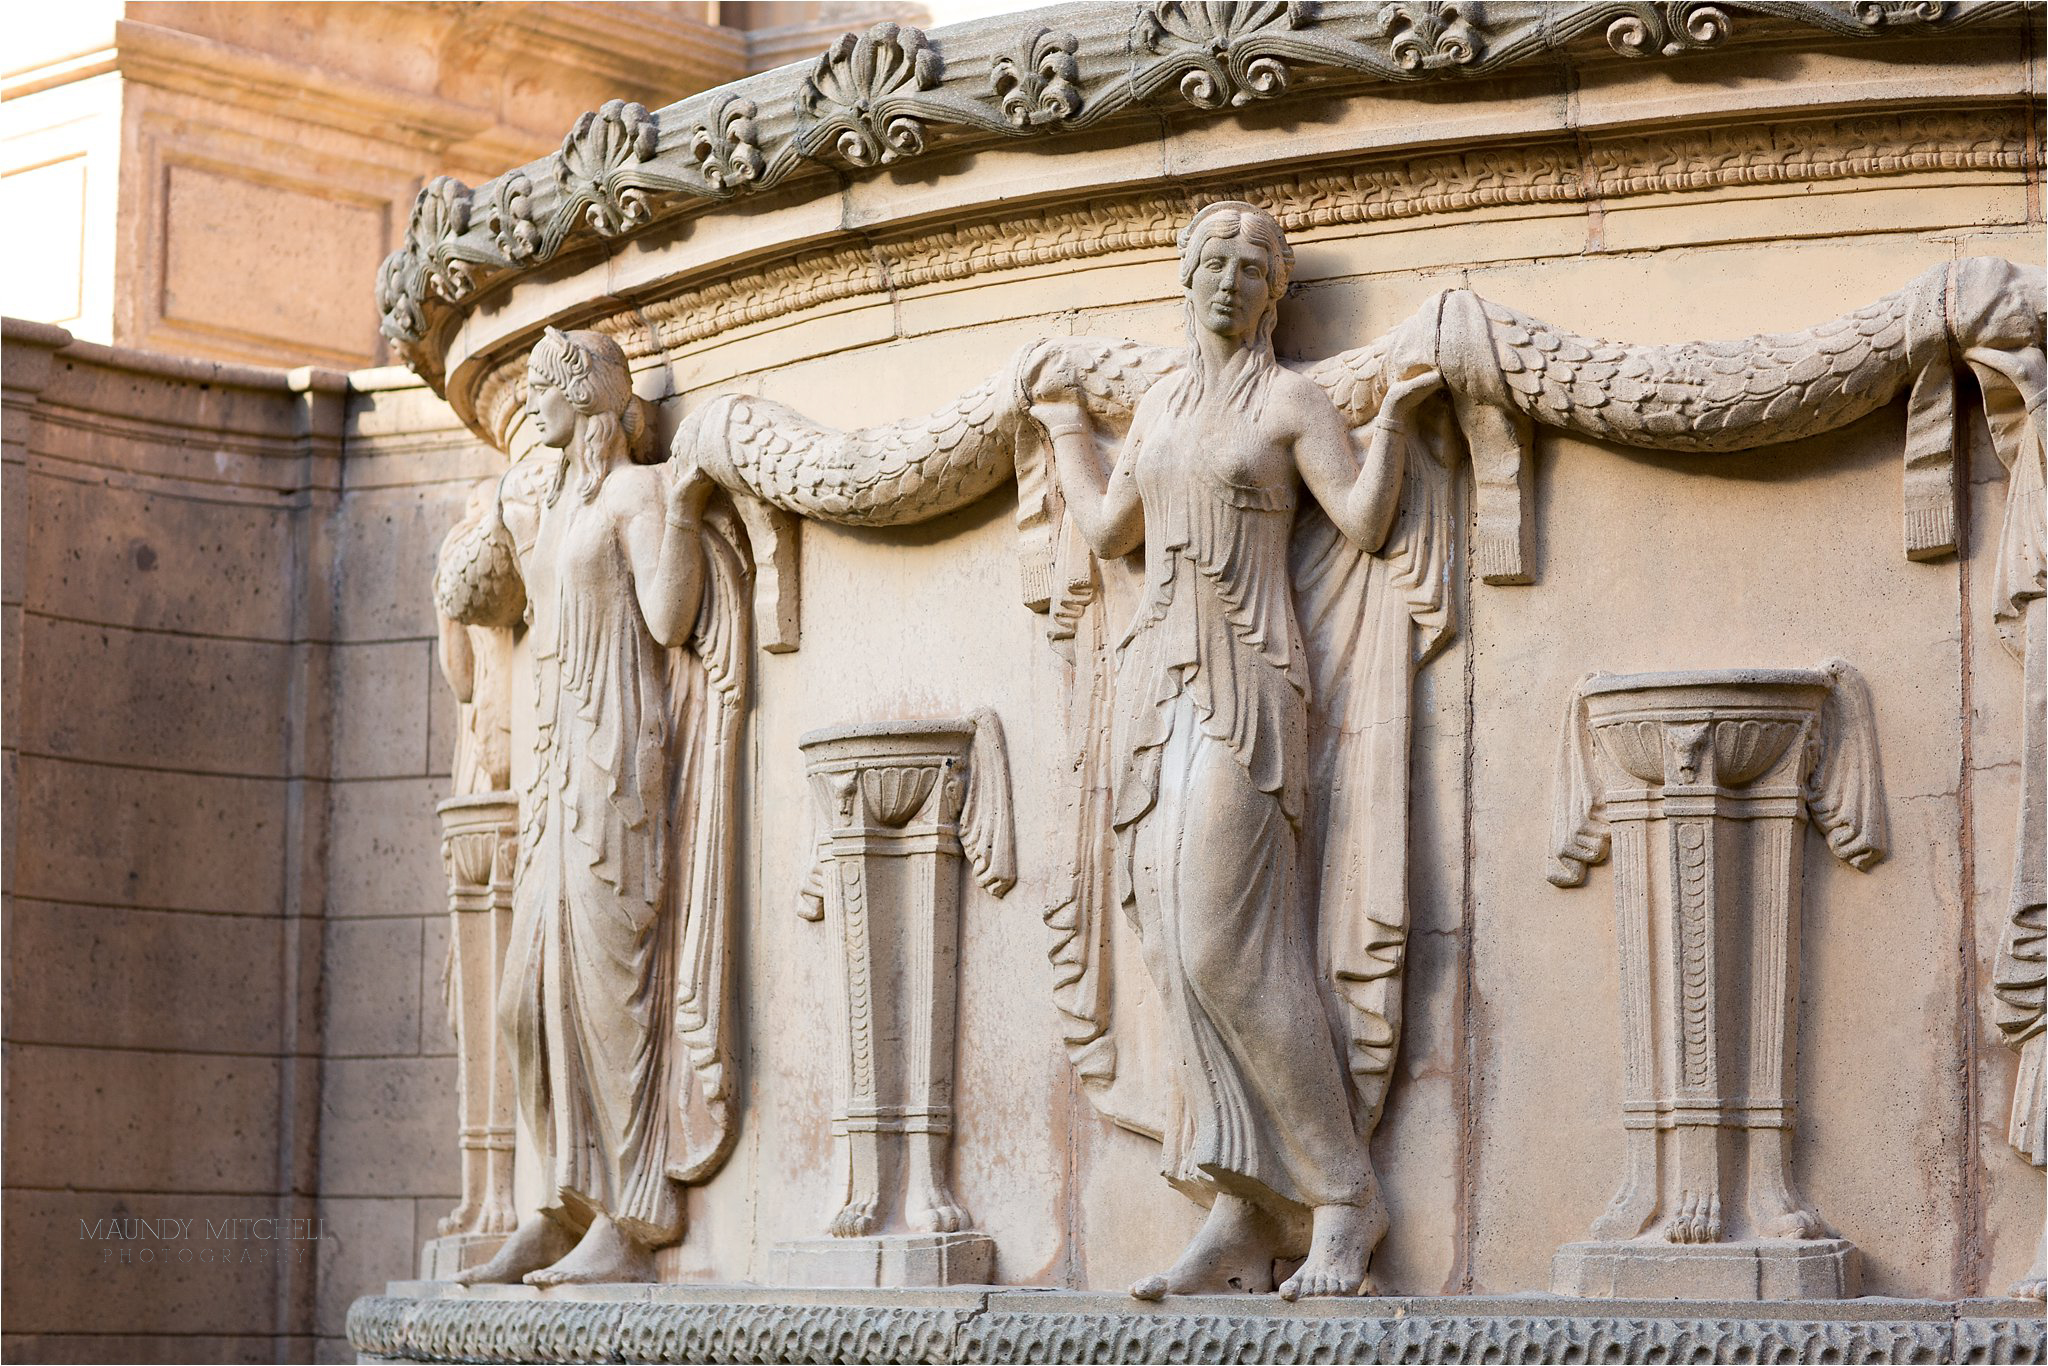 Architectural Detail at The Palace of Fine Arts